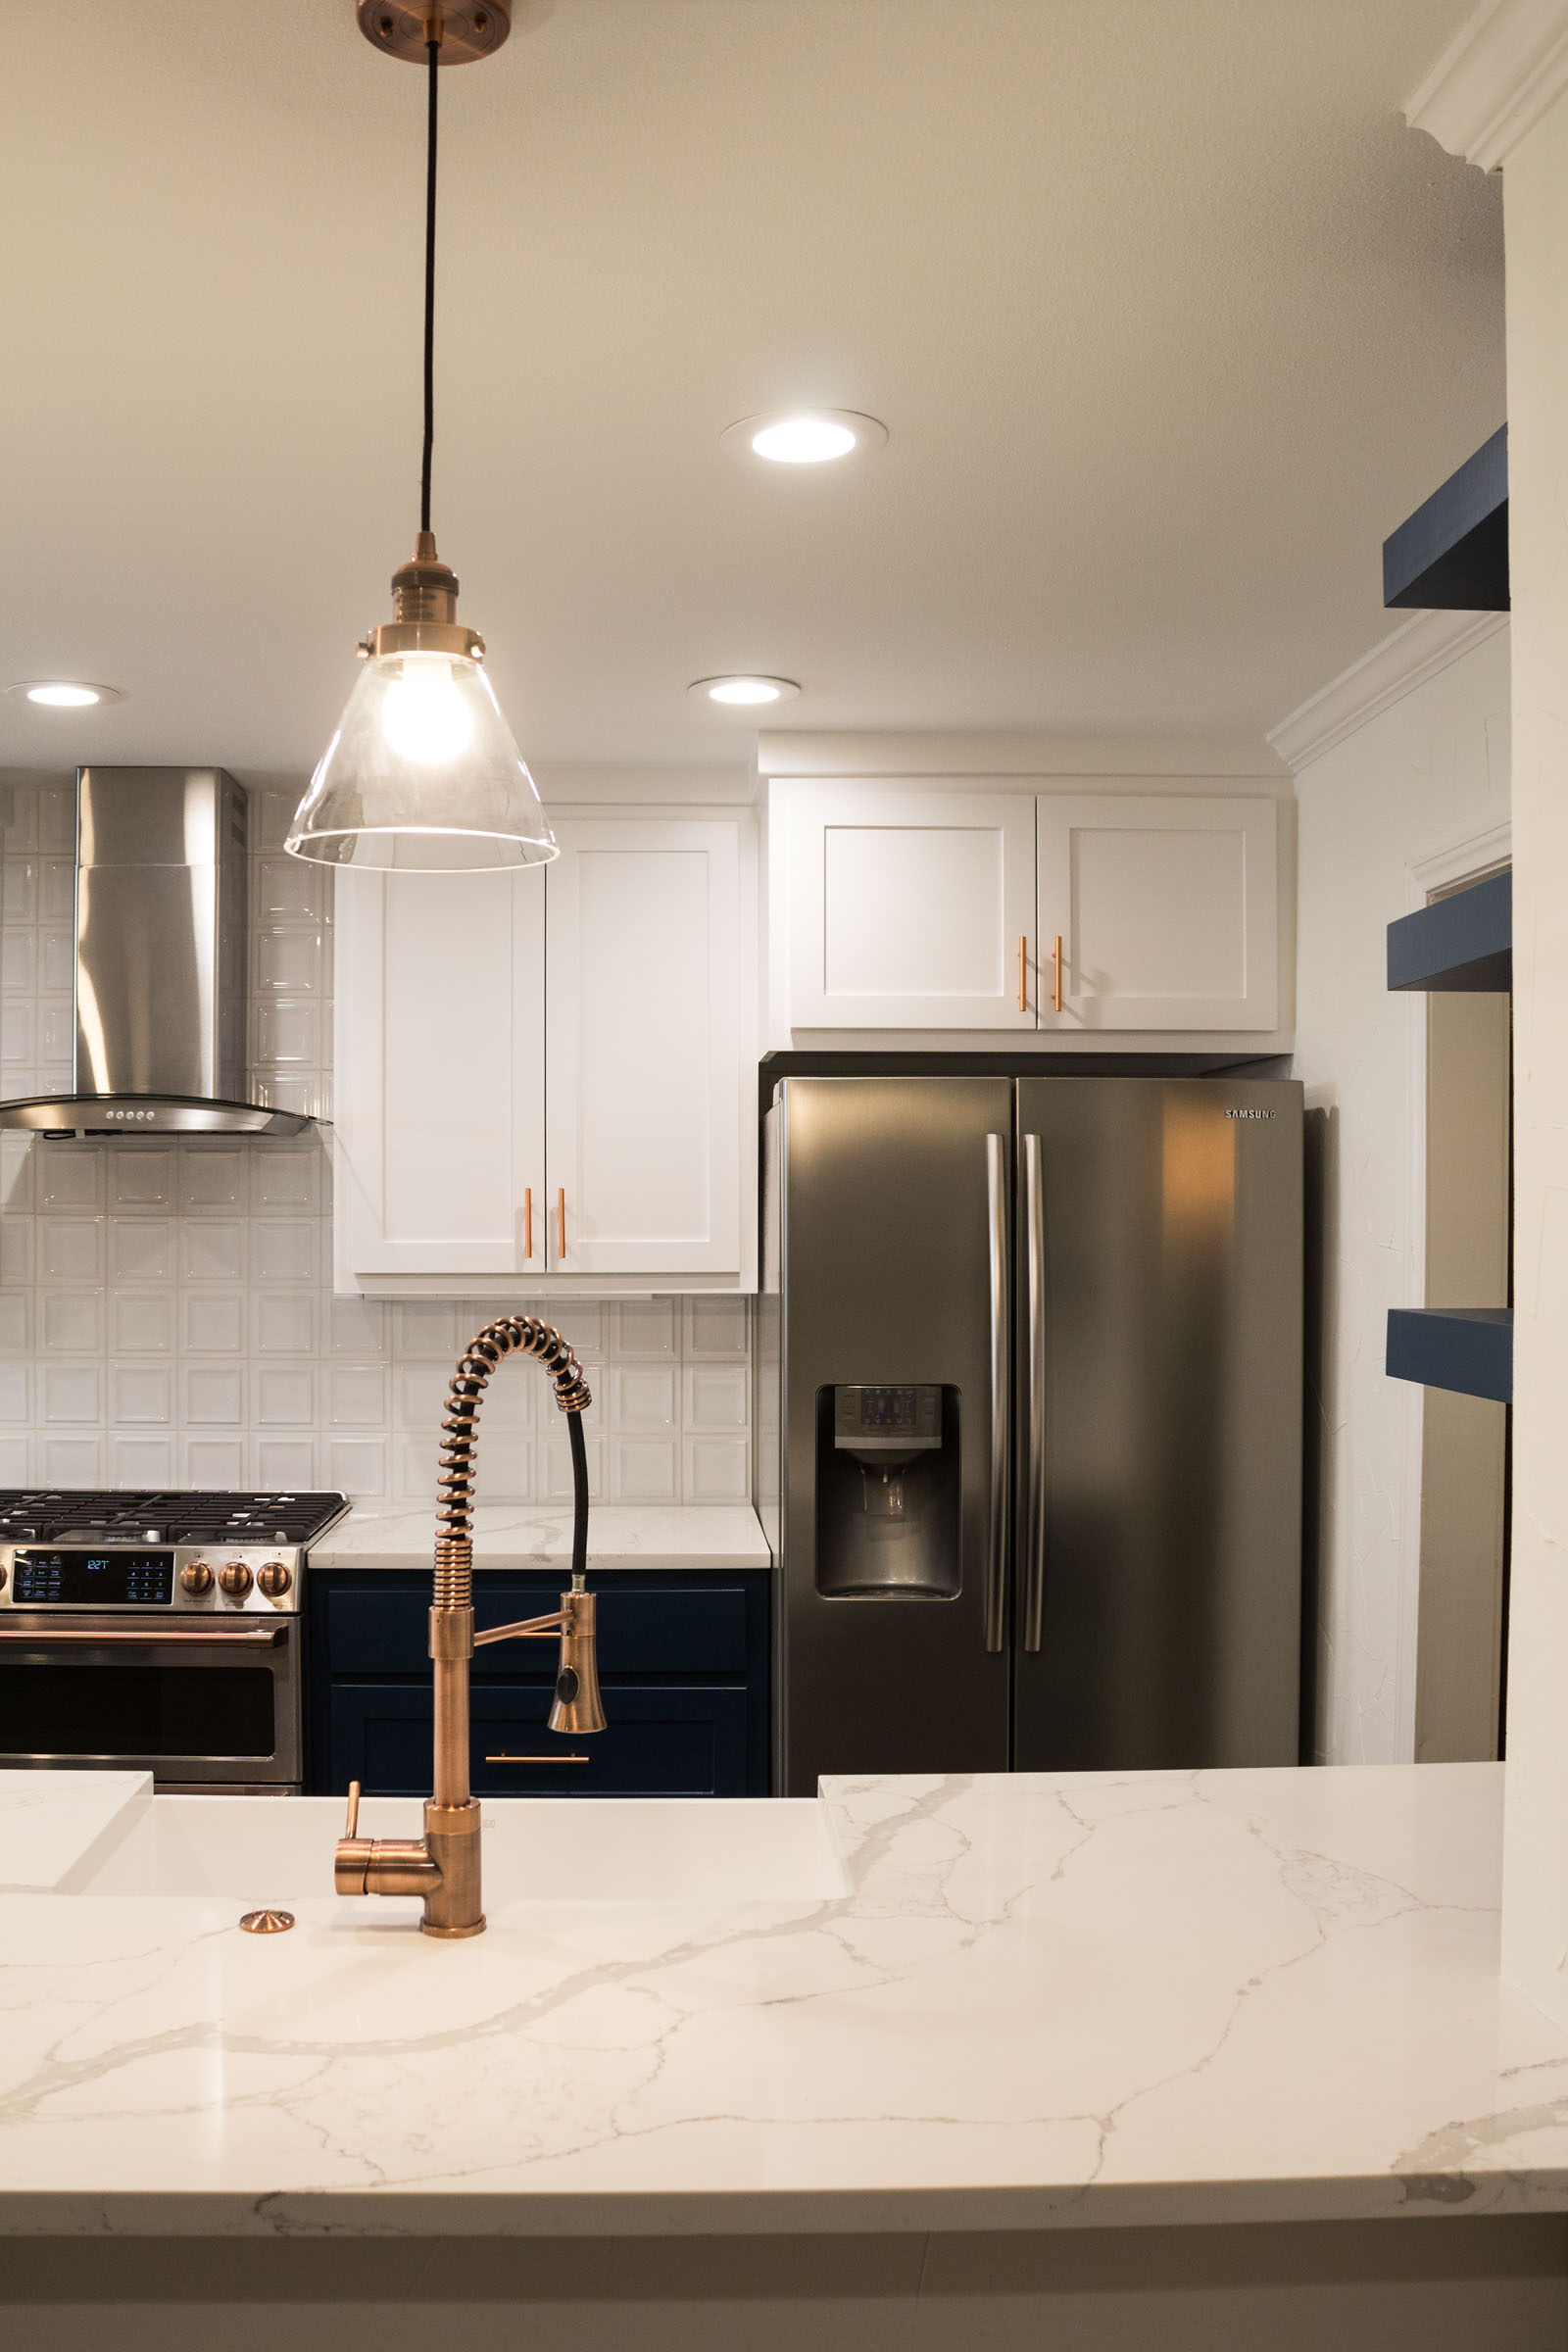 Kitchen remodel with white counters, navy cabinets, and copper hardware